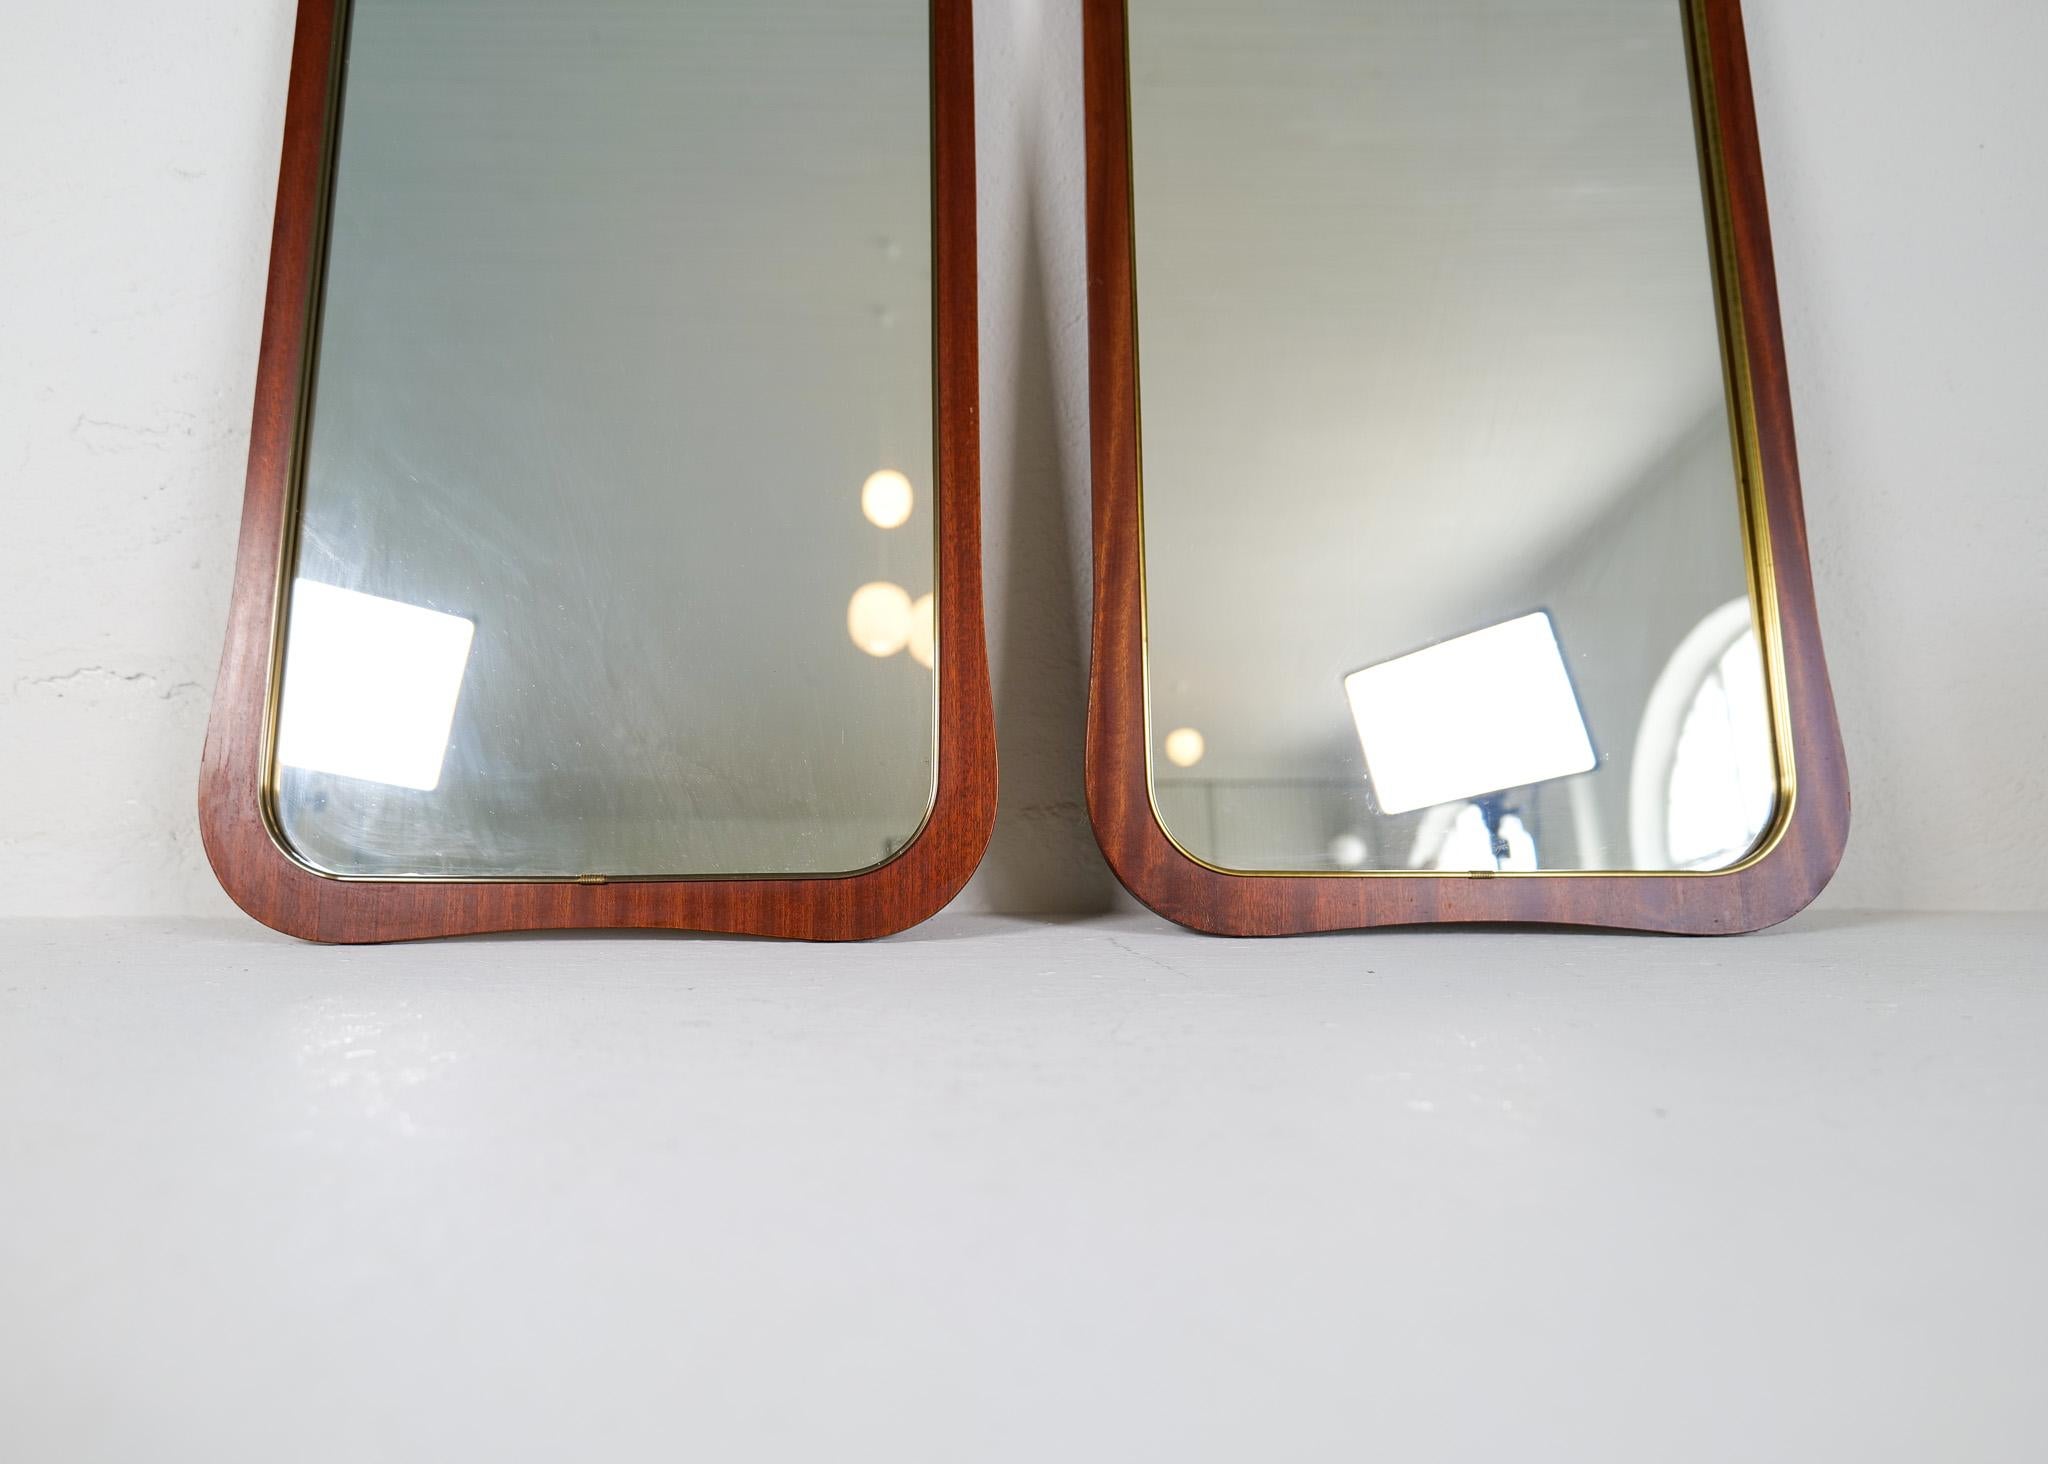 Midcentury Modern Pair of Wood and Brass Mirrors Sweden 1950s For Sale 4